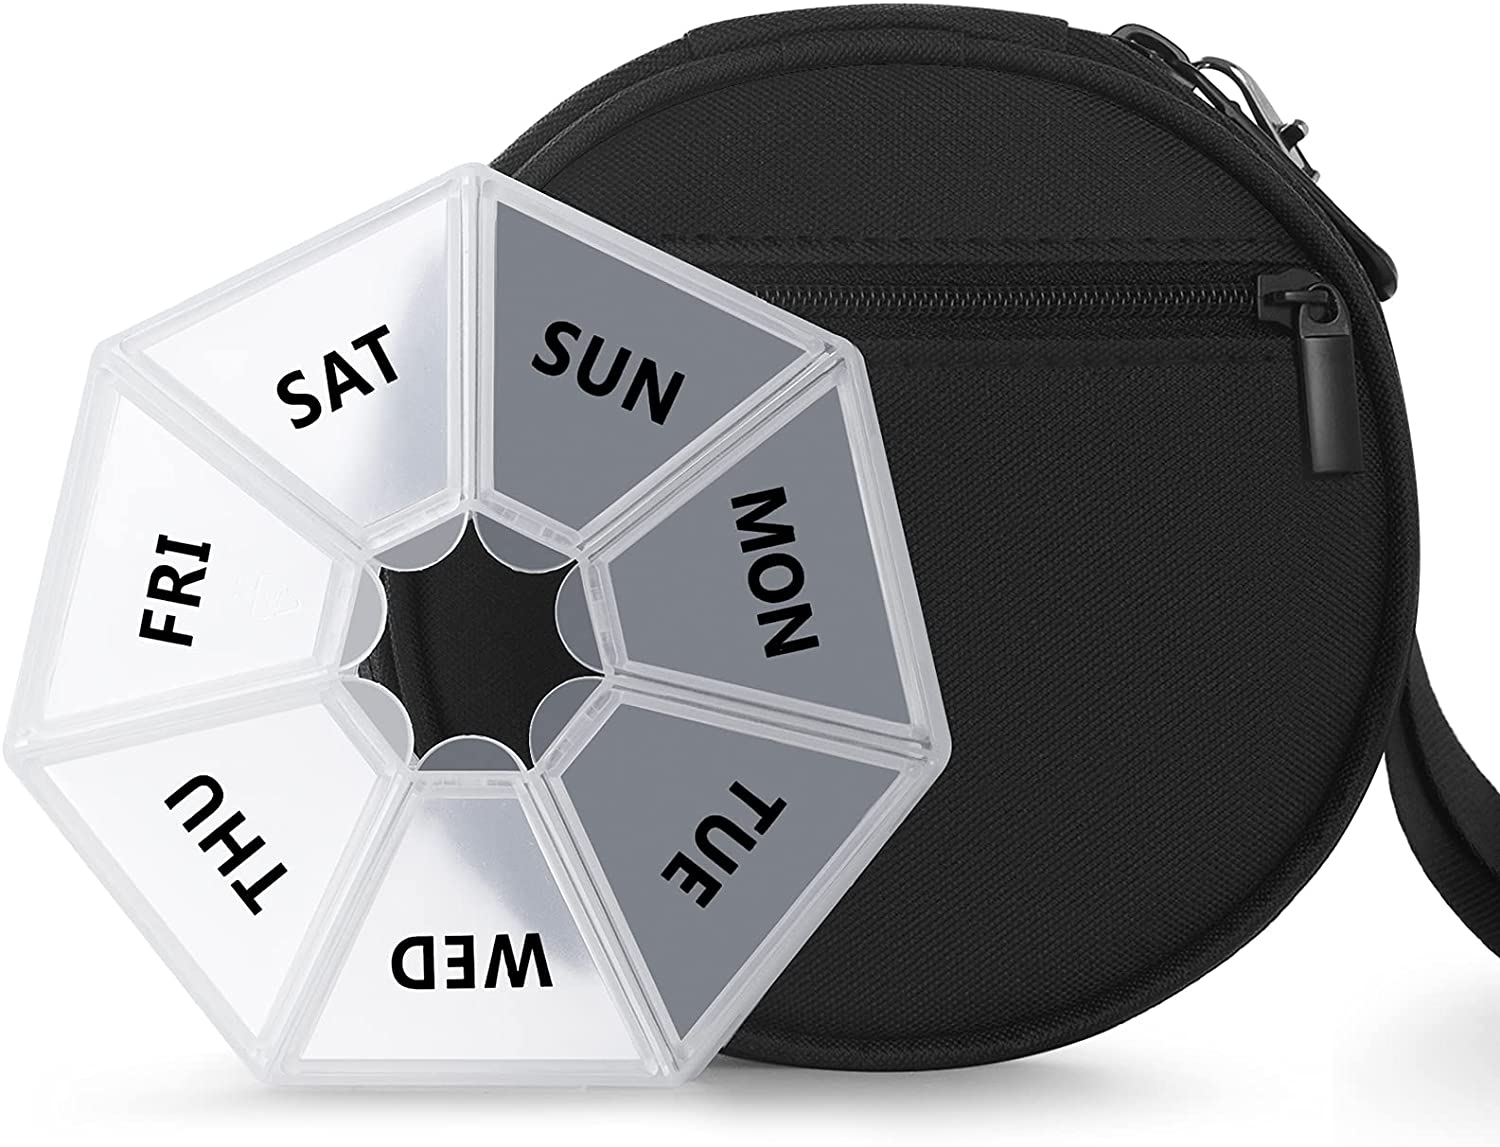 Portable Extra Large Weekly Pill Organizer for Medicine